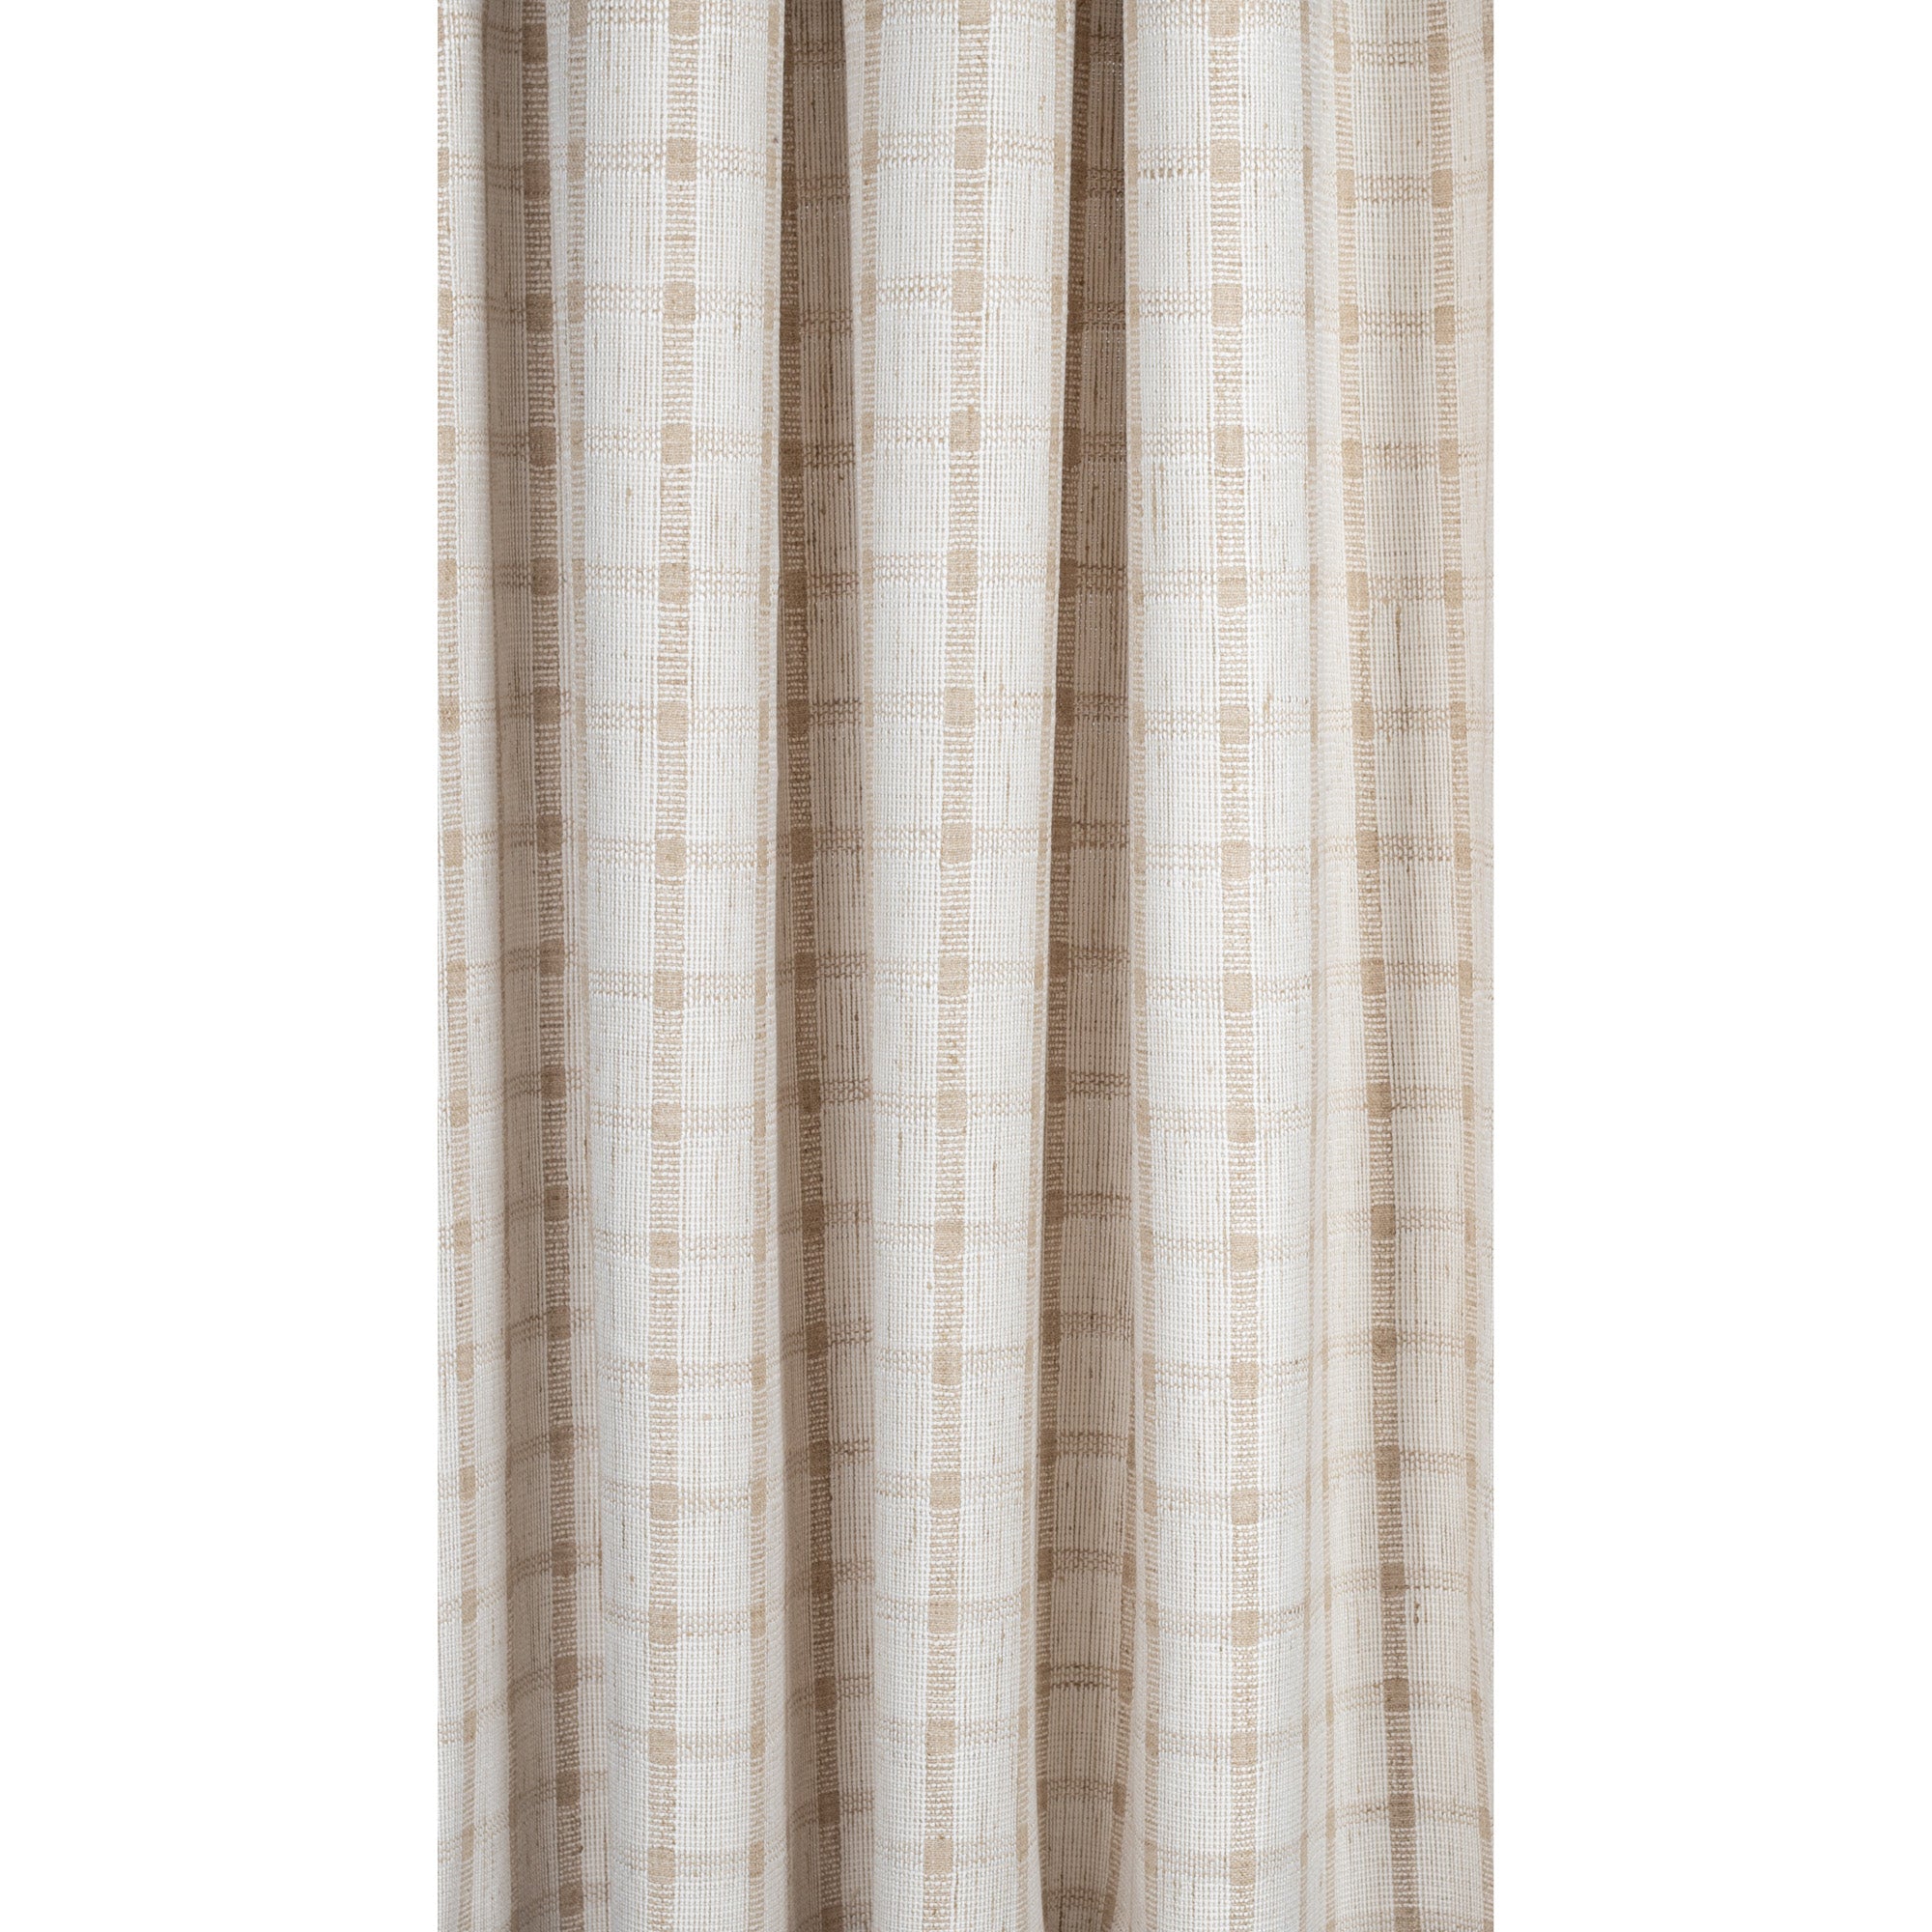 ivory white and flax beige plaid check drapery fabric